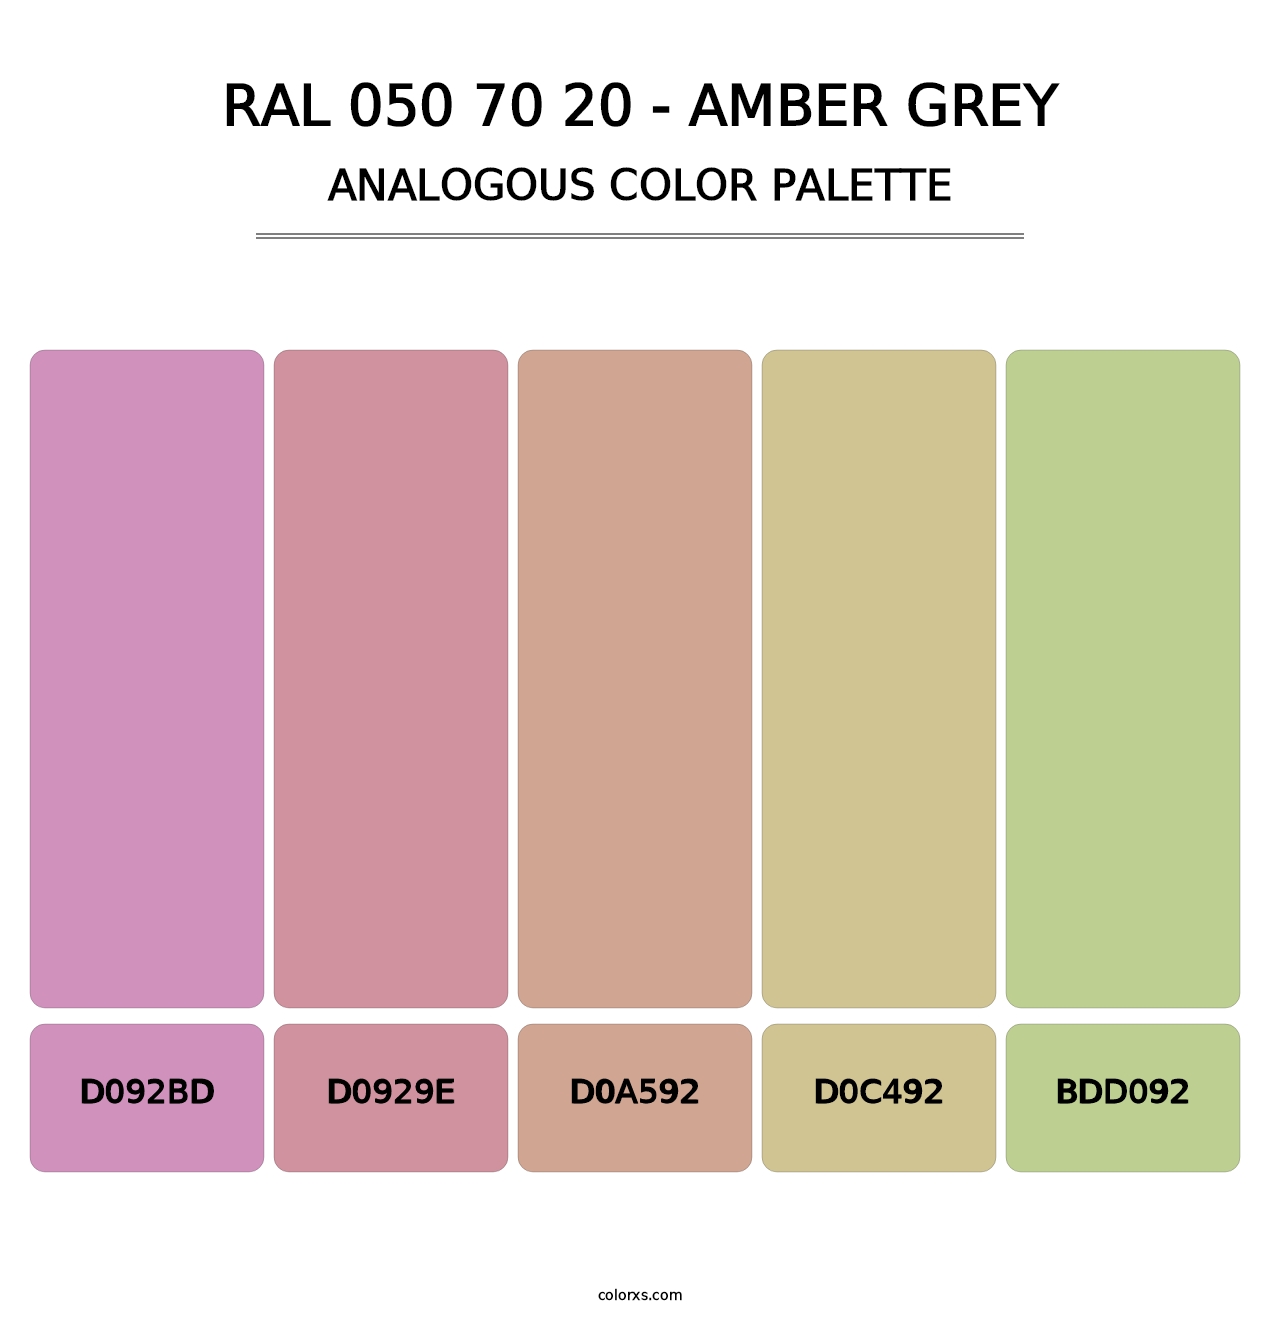 RAL 050 70 20 - Amber Grey - Analogous Color Palette